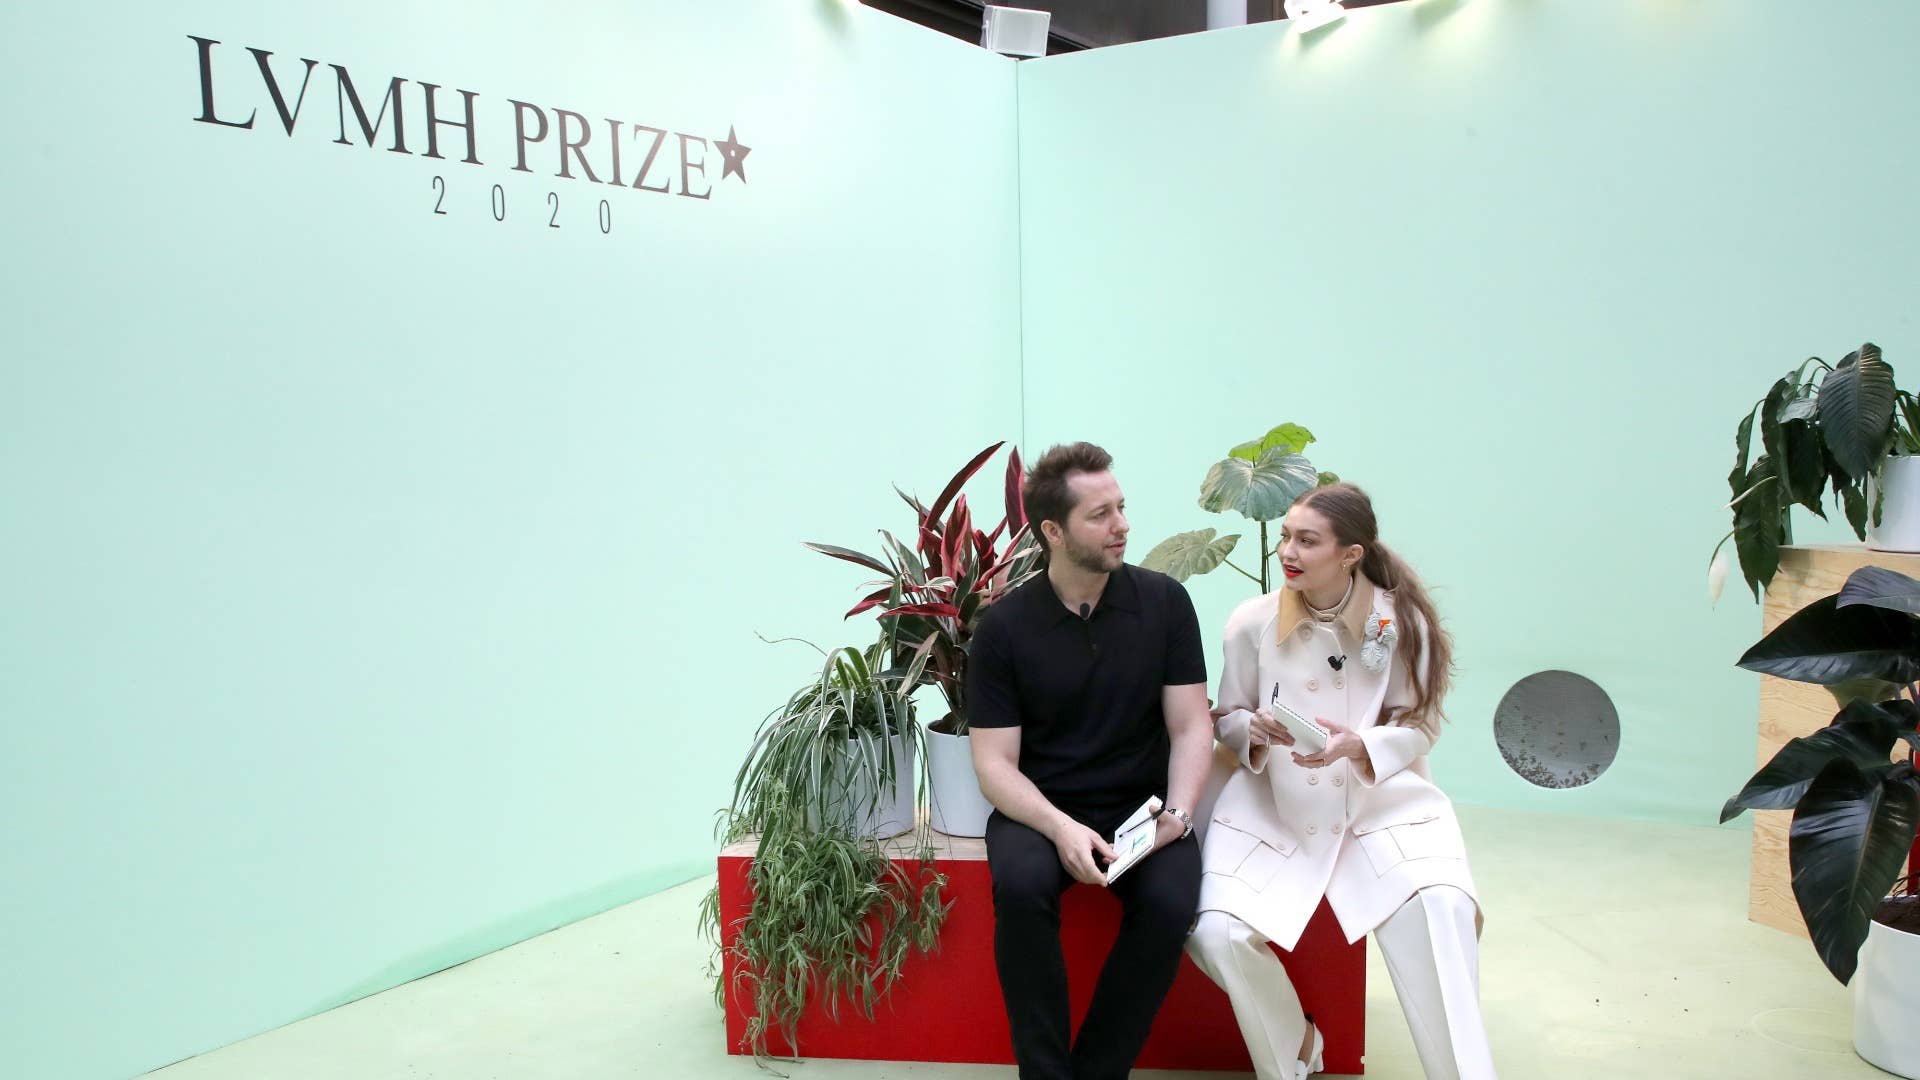 LVMH Prize 2020 to Be Divided Equally Among 8 Finalists Due to COVID-19